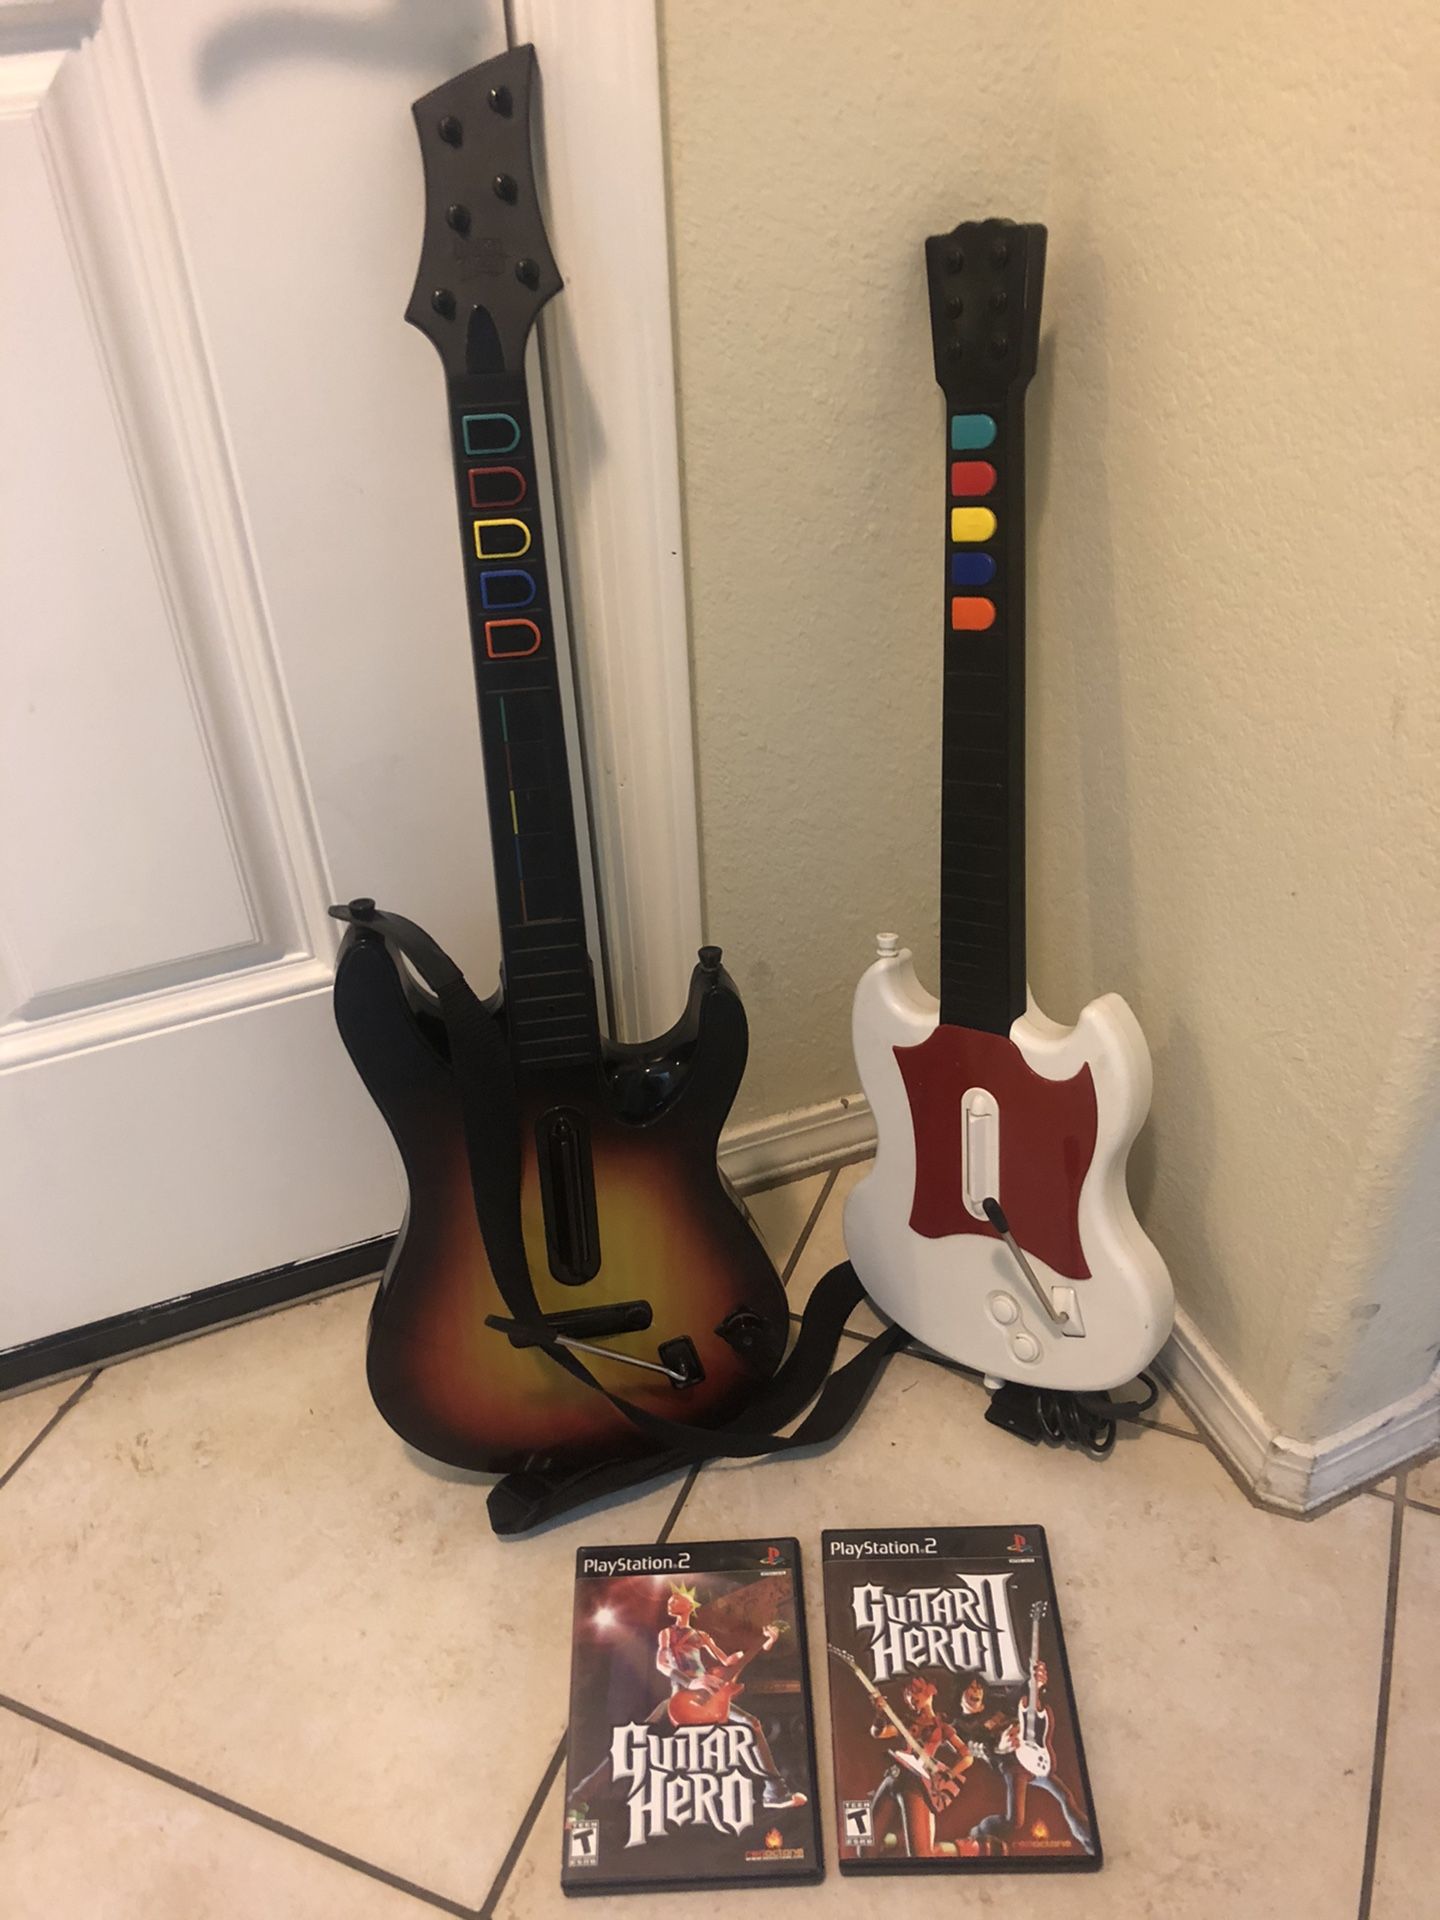 Playstation 2 PS2 2 Guitar Hero guitars & 2 games. All works well.